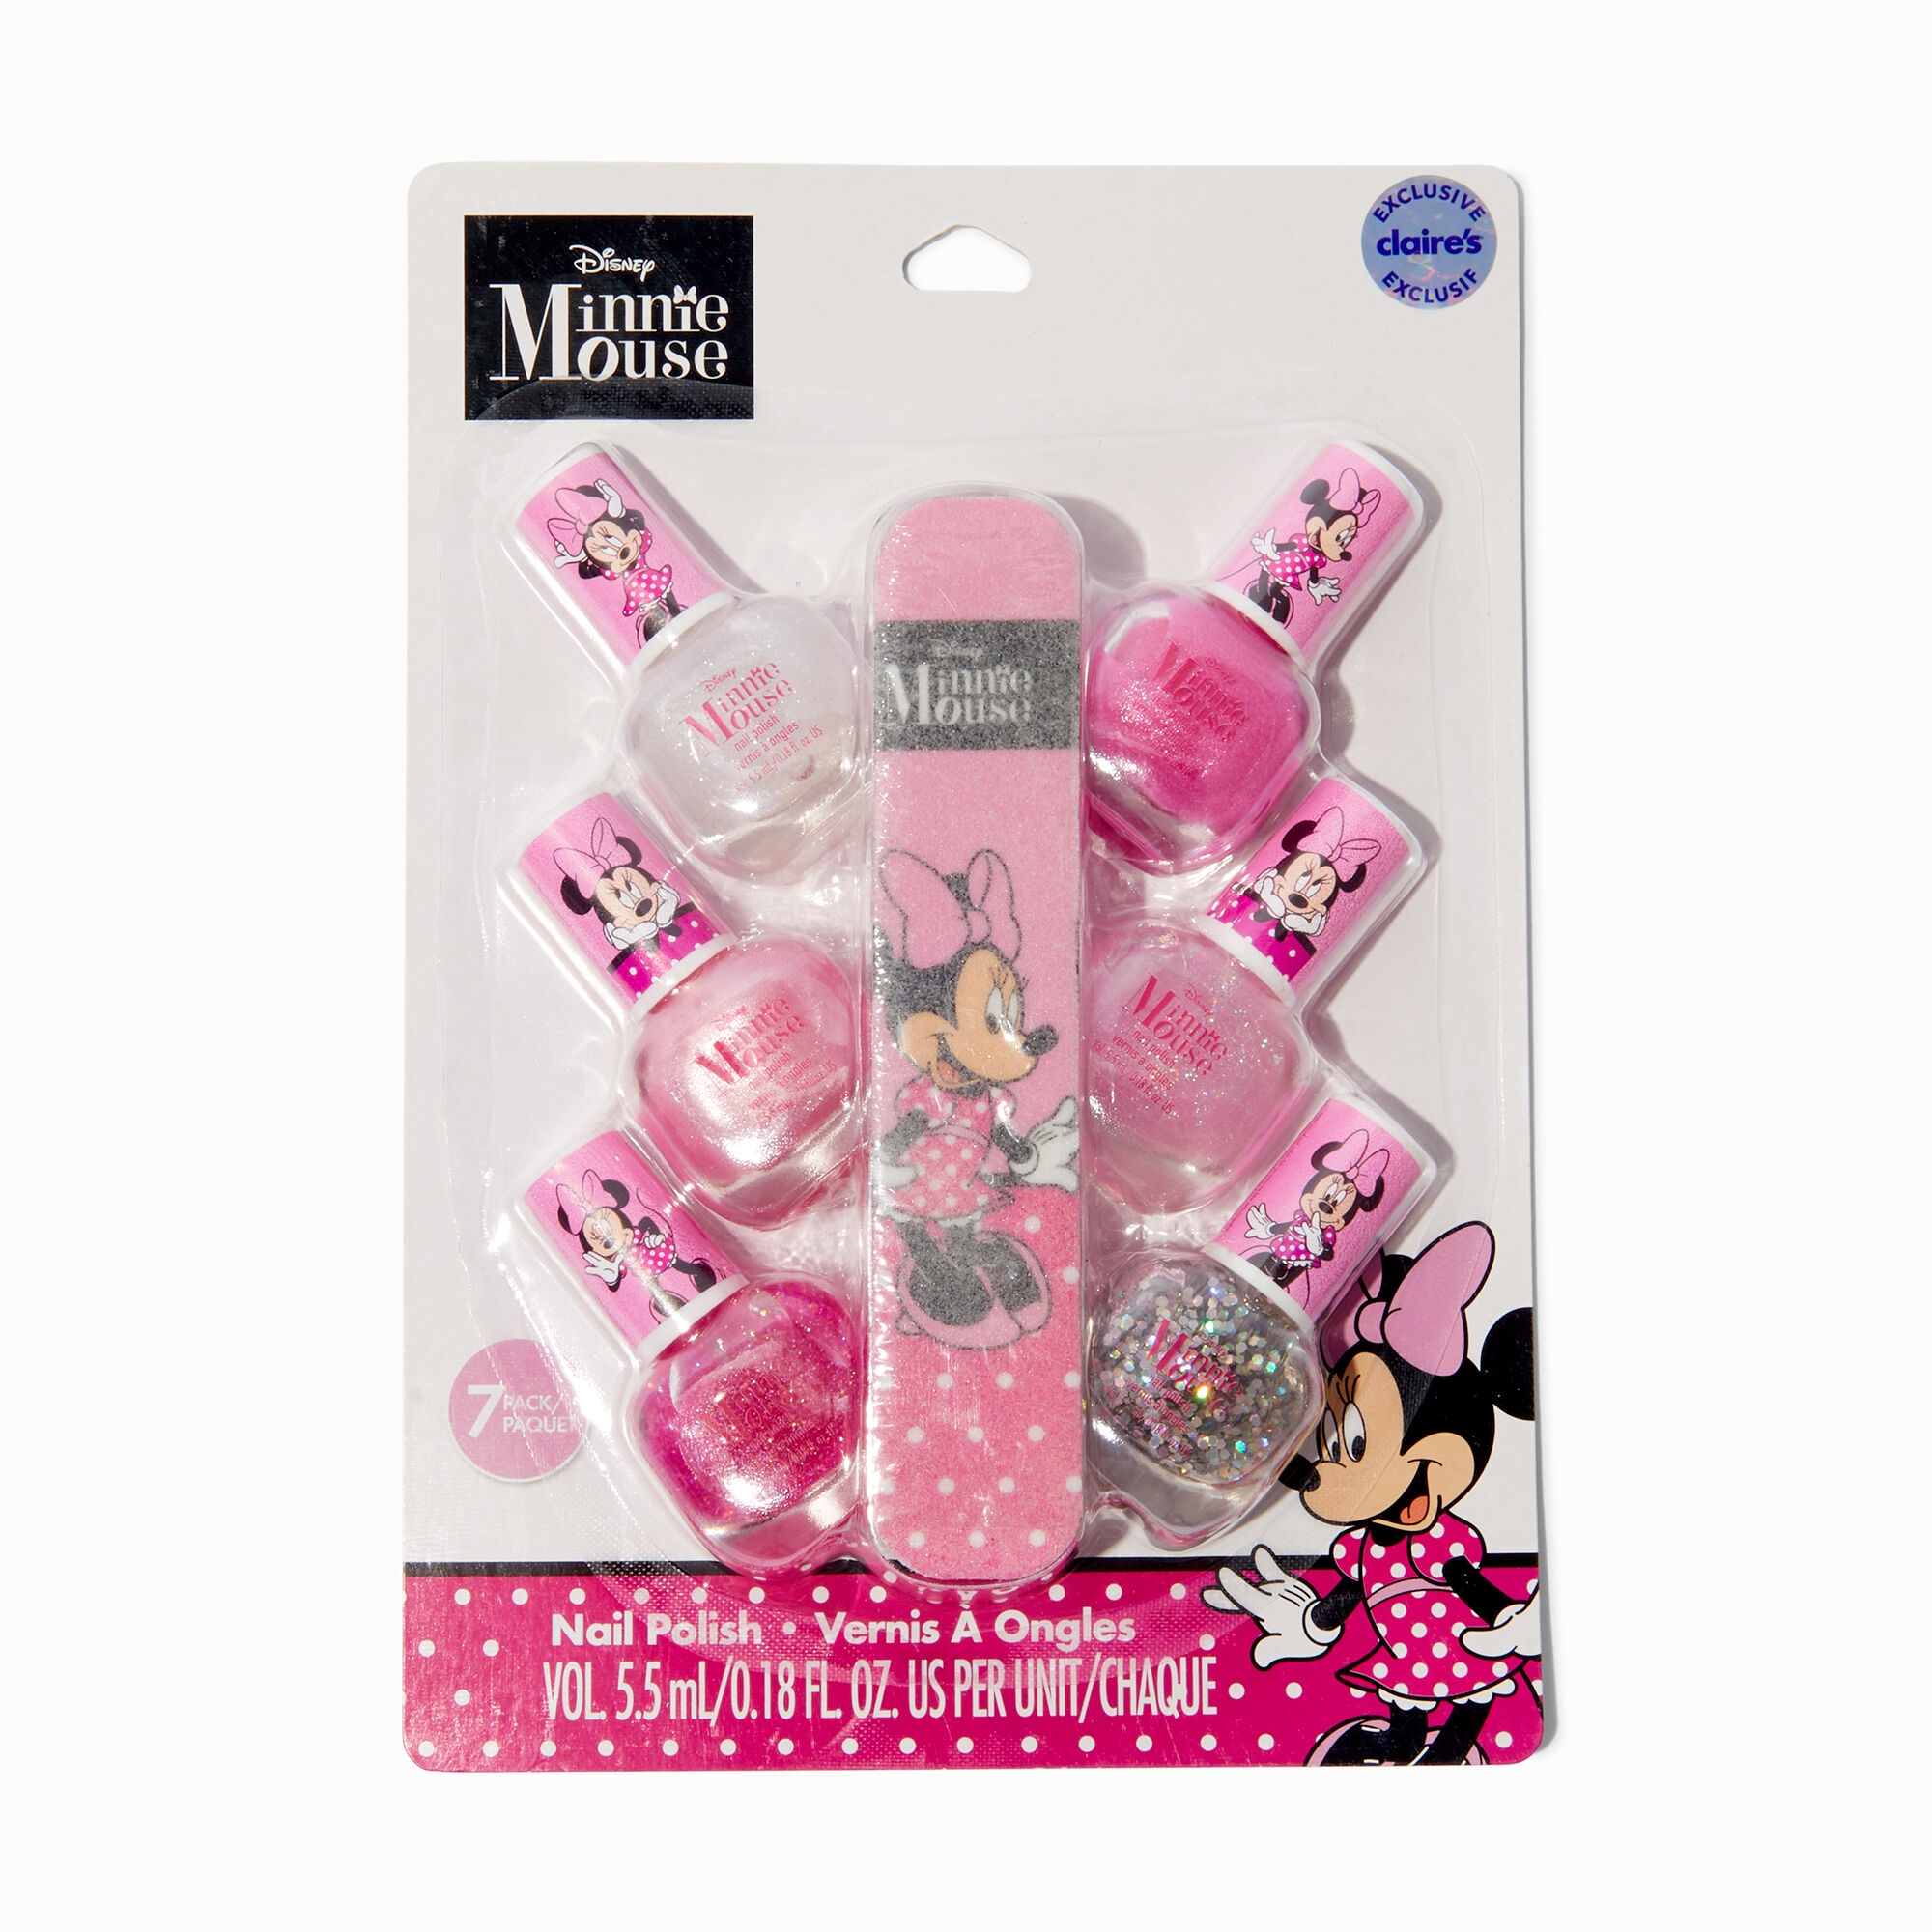 View Disney Minnie Mouse Claires Exclusive Nail Polish Set 7 Pack information